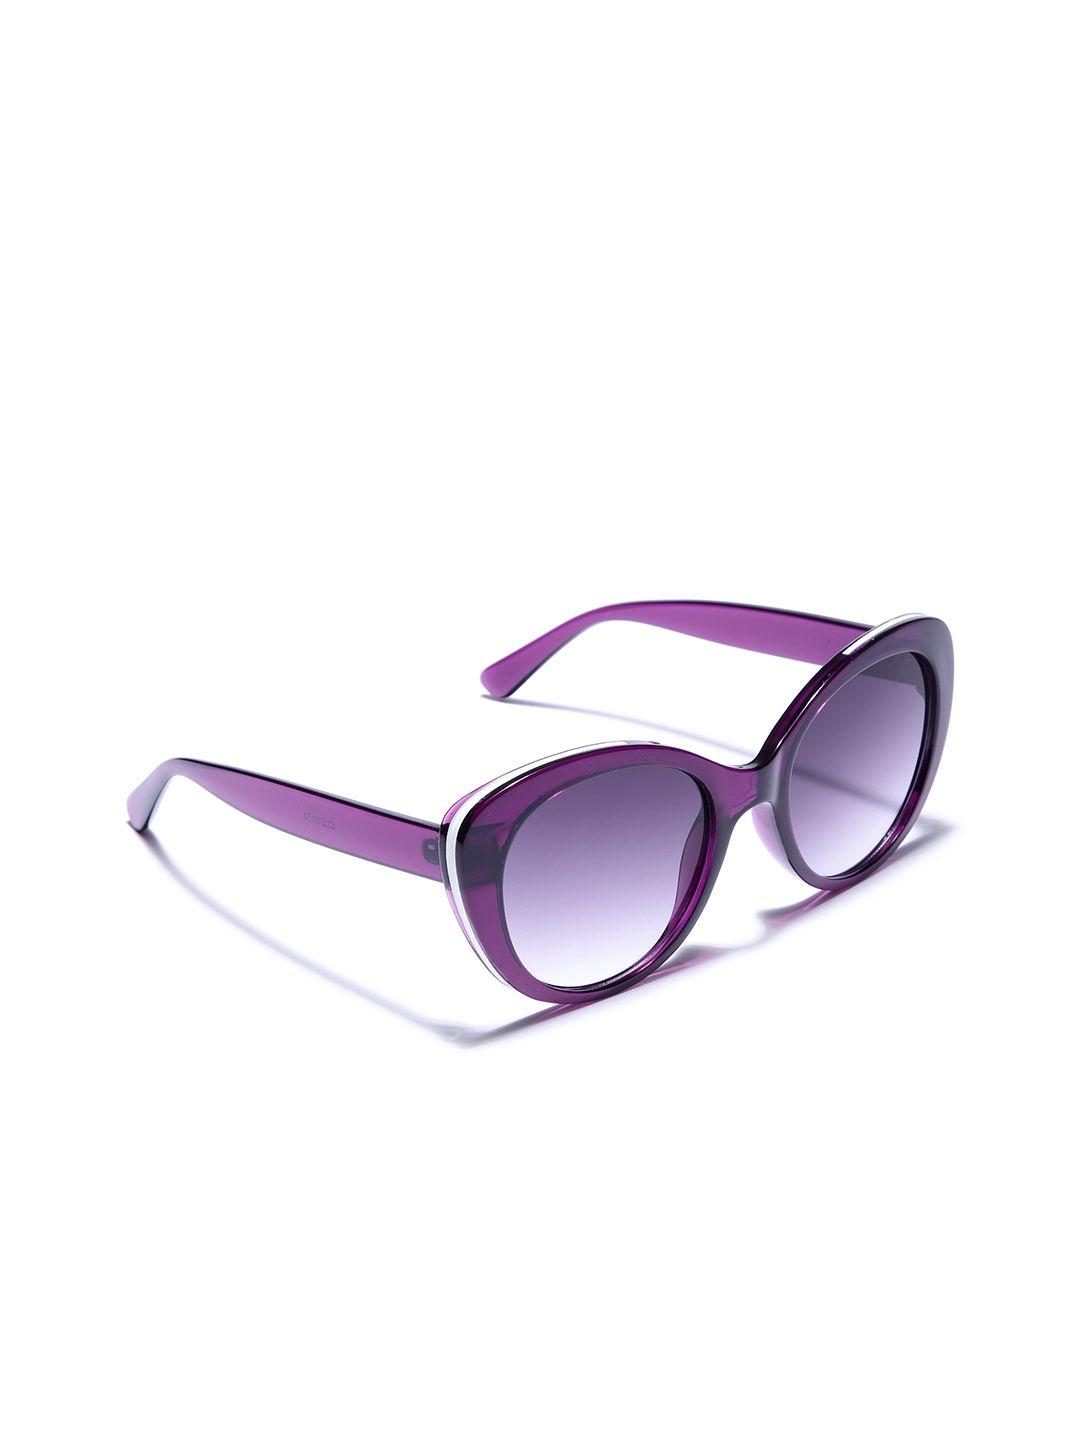 carlton-london-women-cateye-sunglasses-with-uv-protected-lens-clsw173